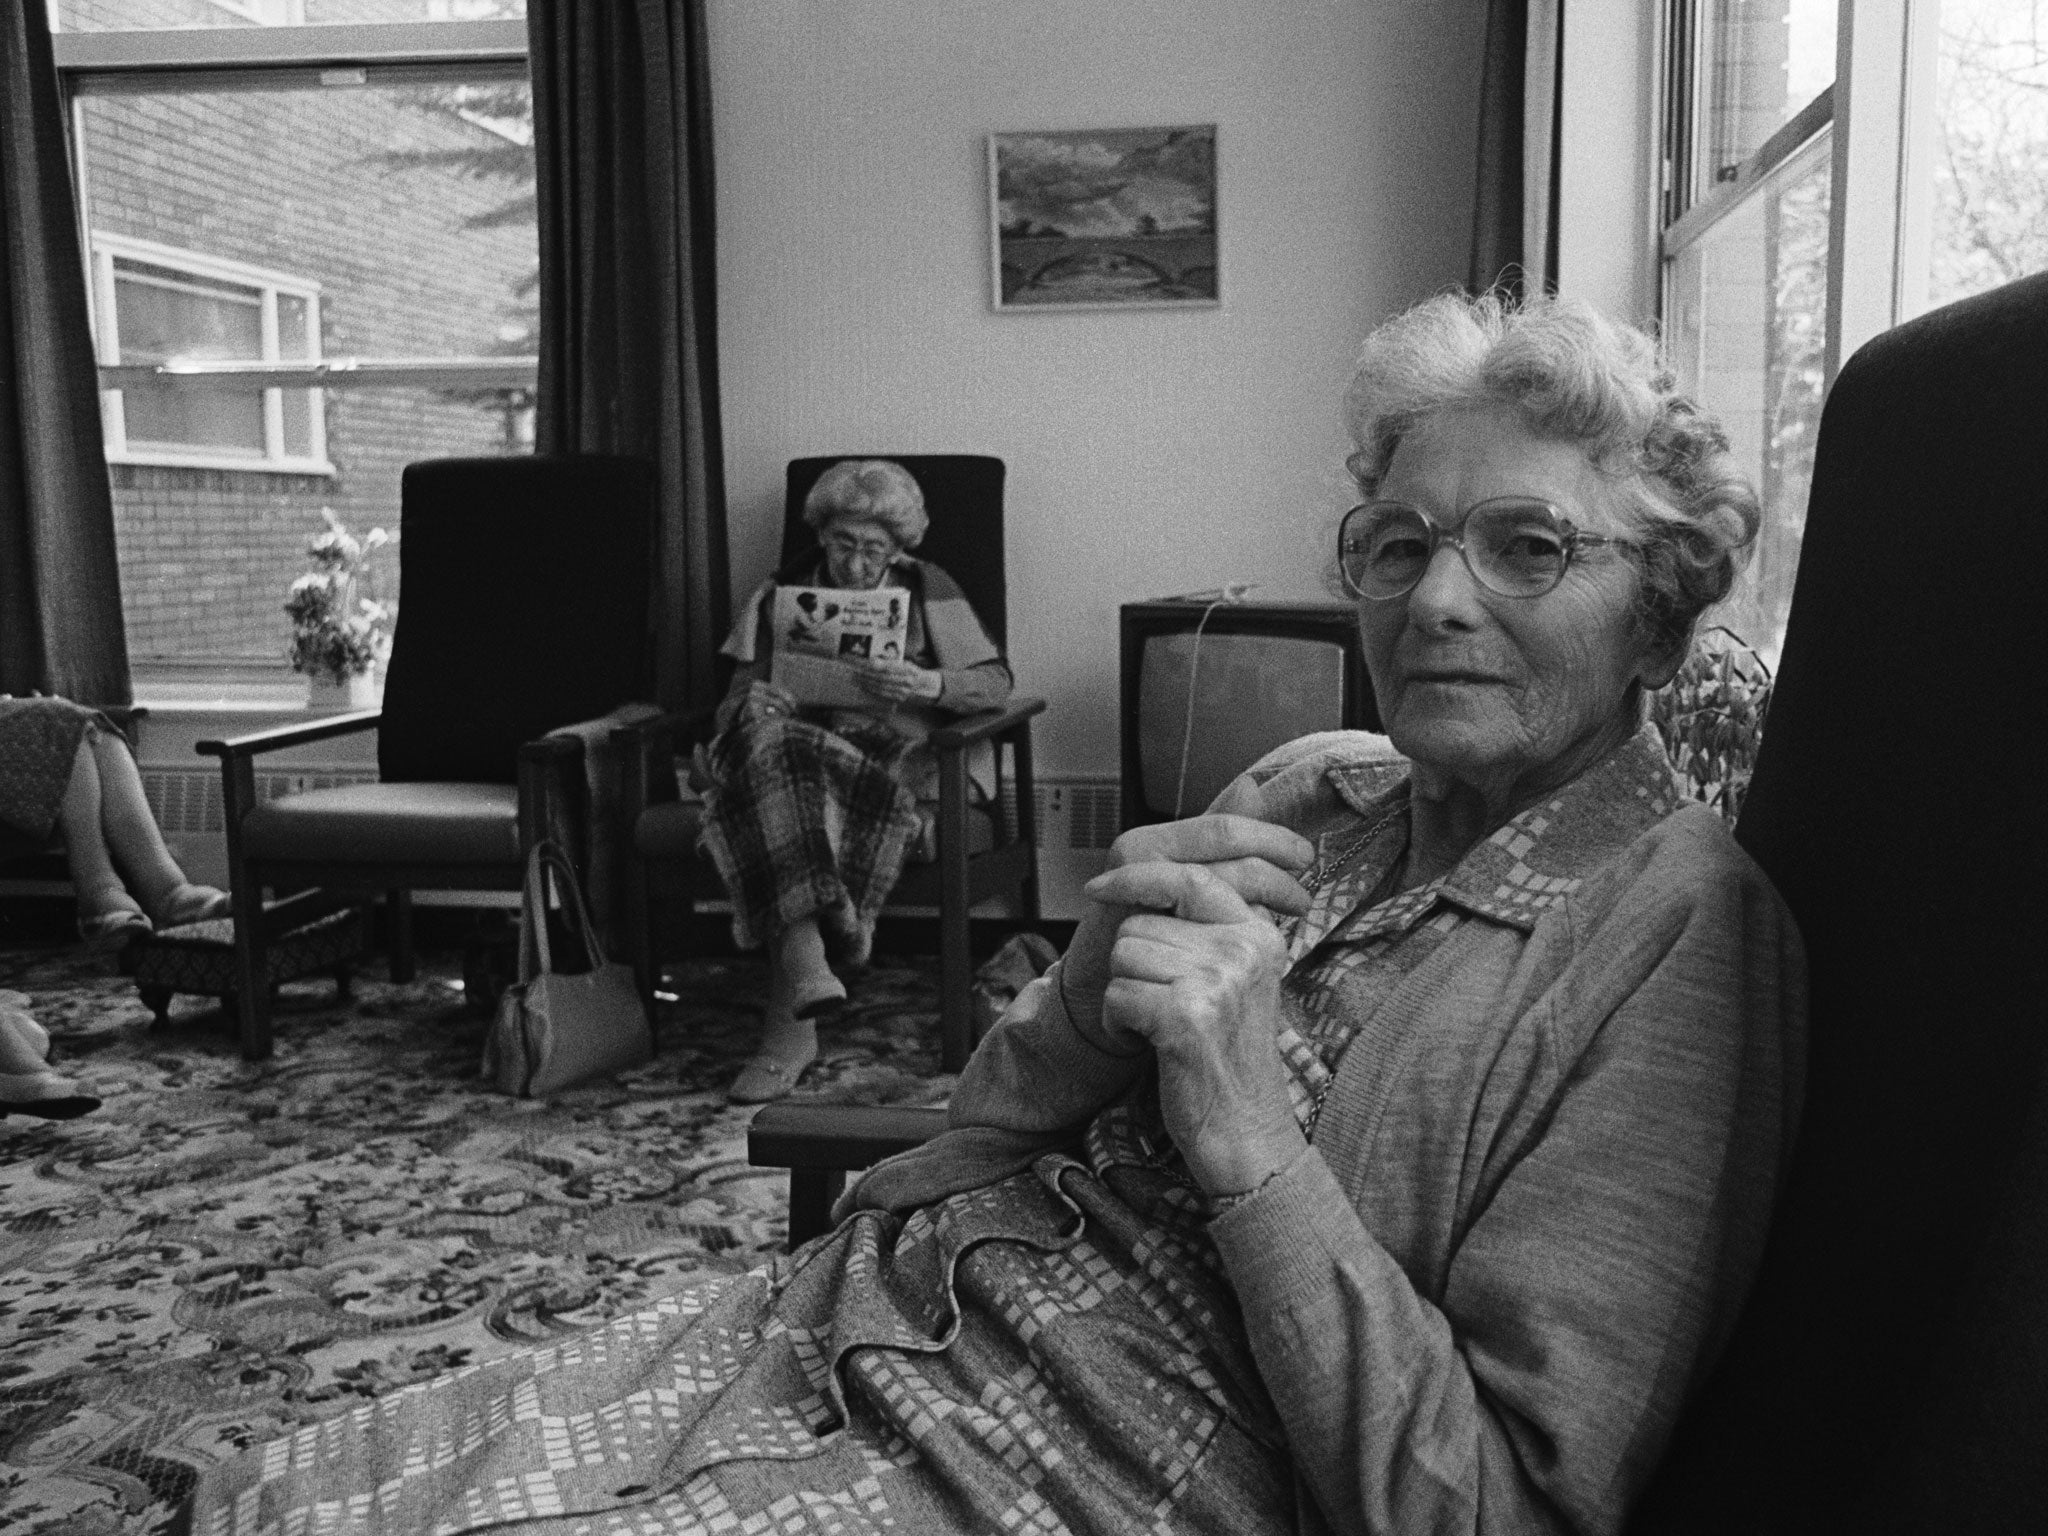 Residents at an old people's home in Middlesbrough, 1986.